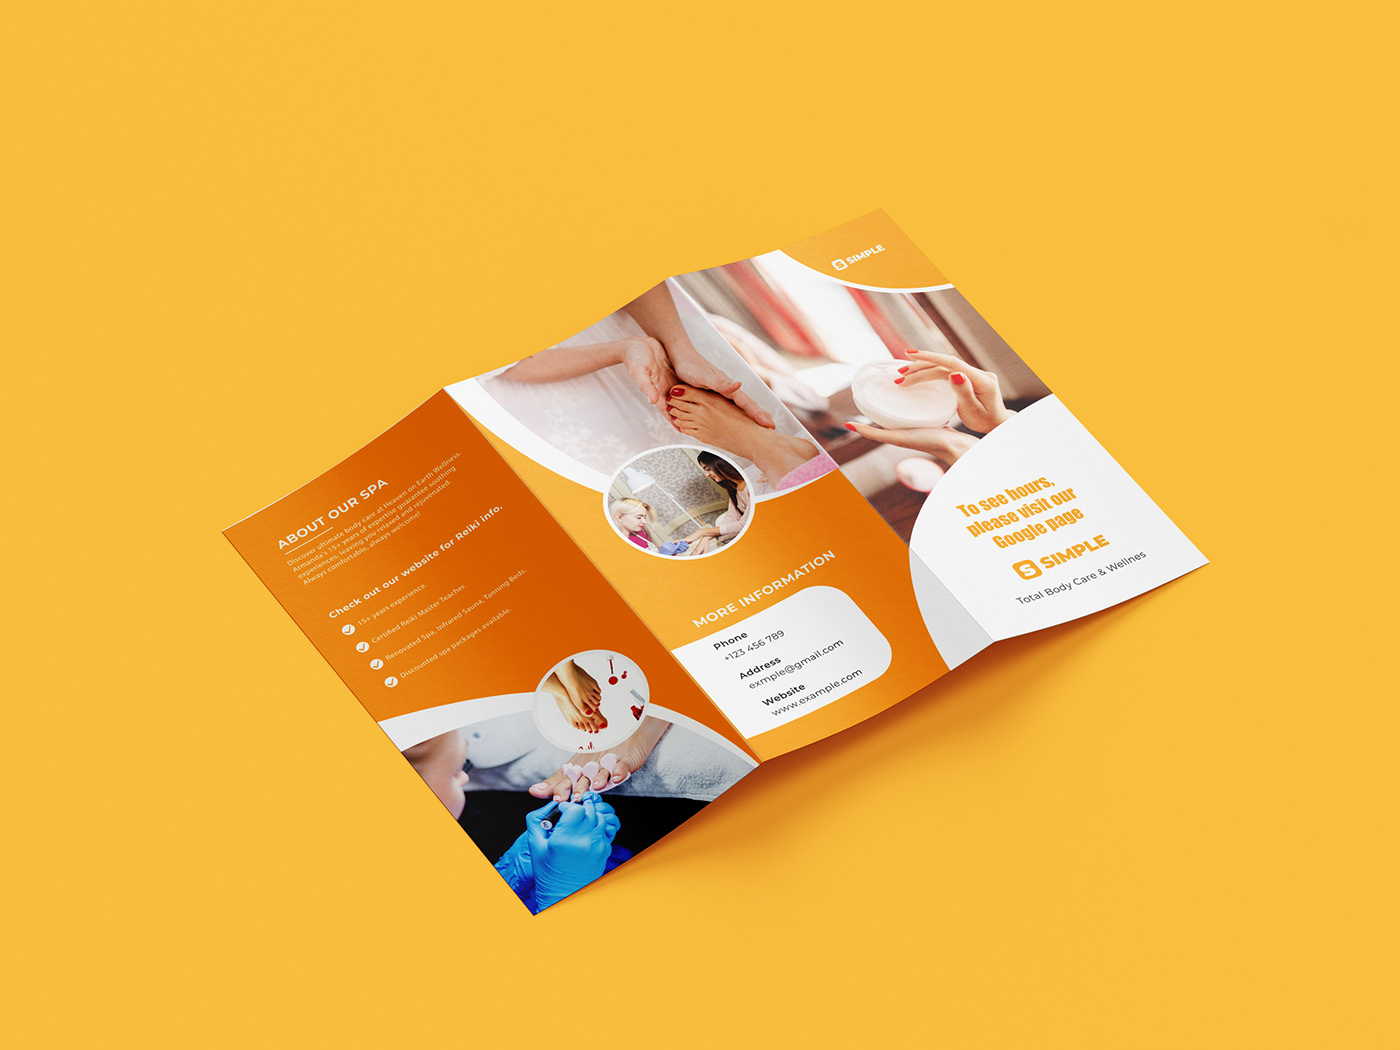 design nail trifold trifold brochure Trifold Brochure Design flyer Graphic Designer BEauty nails